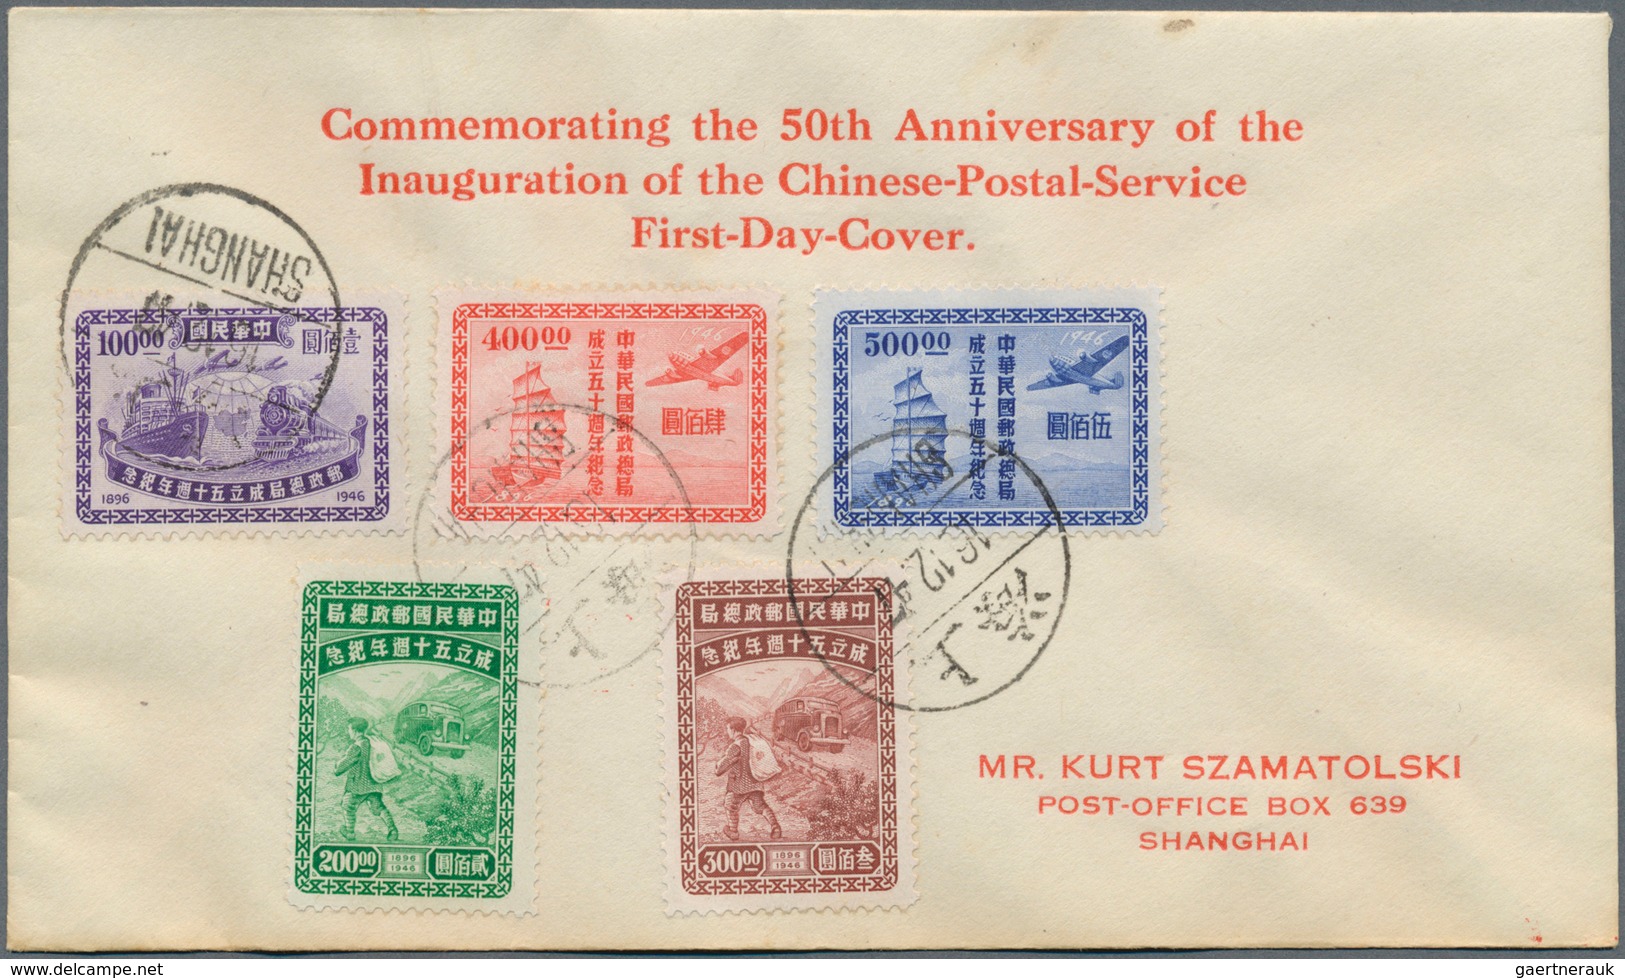 08176 China: 1947/48, FDC (7) all different inc. May 23 SYS torch issue; also 1947 cover to Hong Kong. Tot